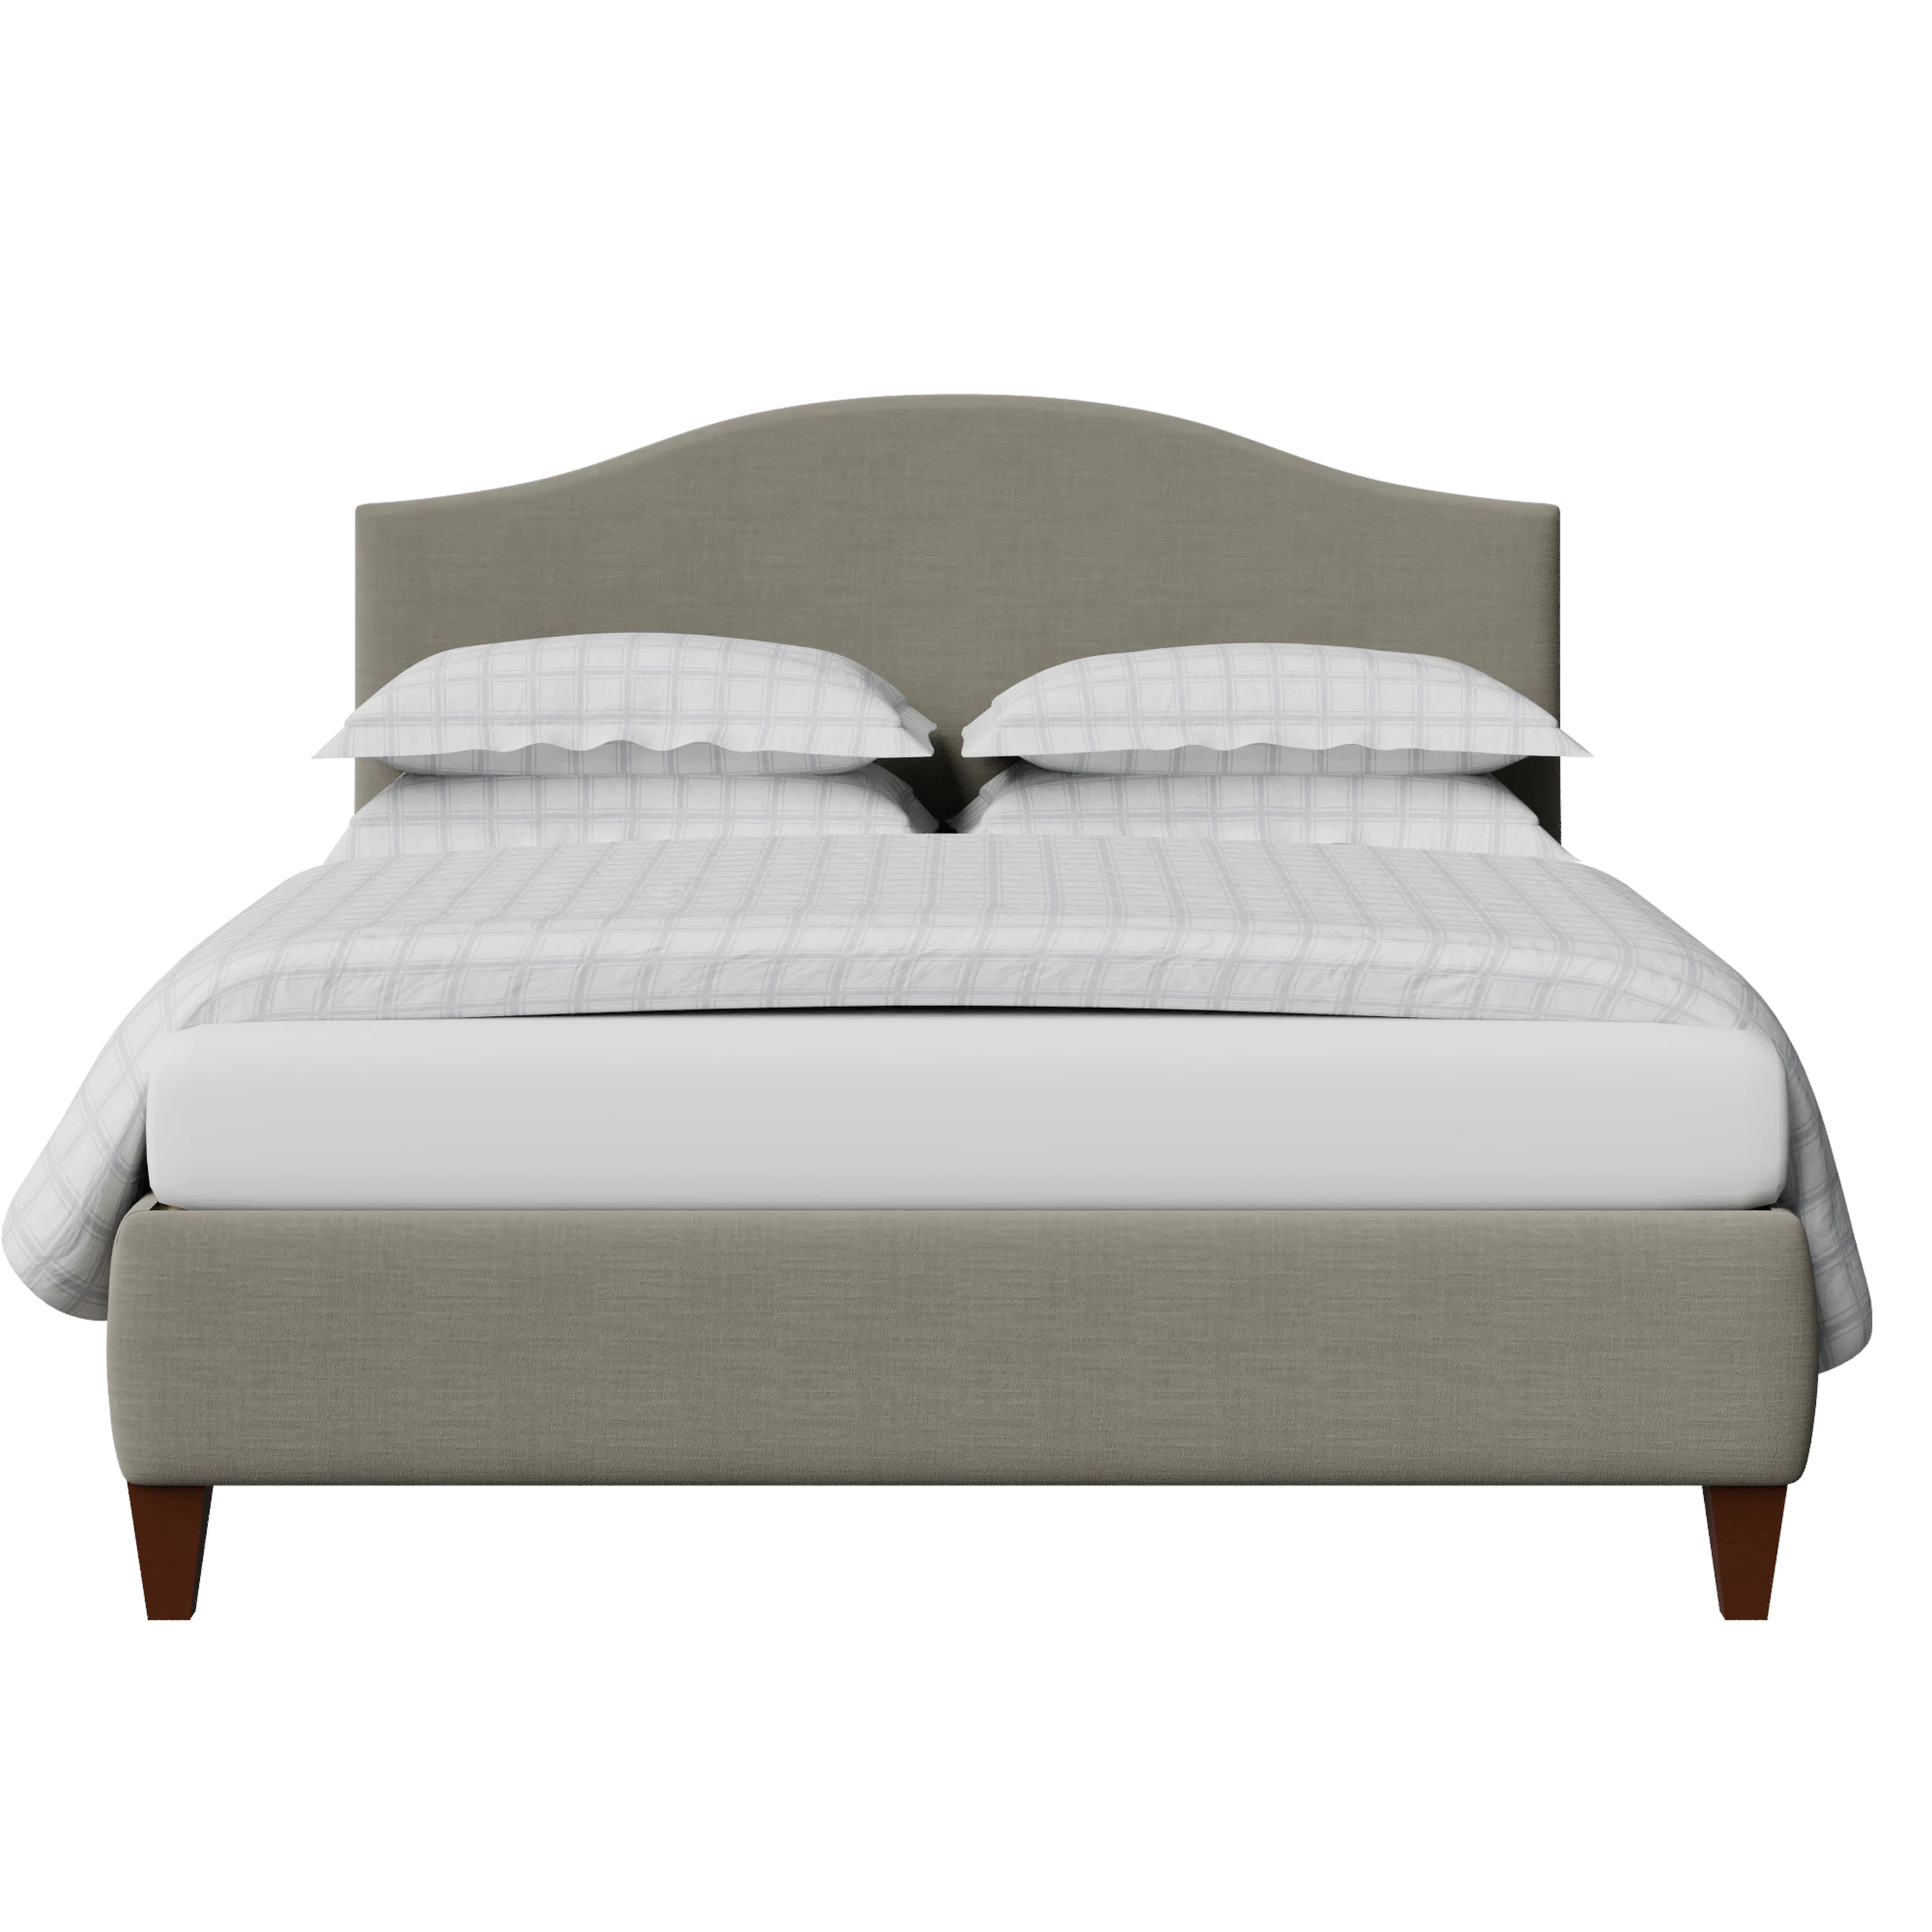 Daniella upholstered bed in grey fabric